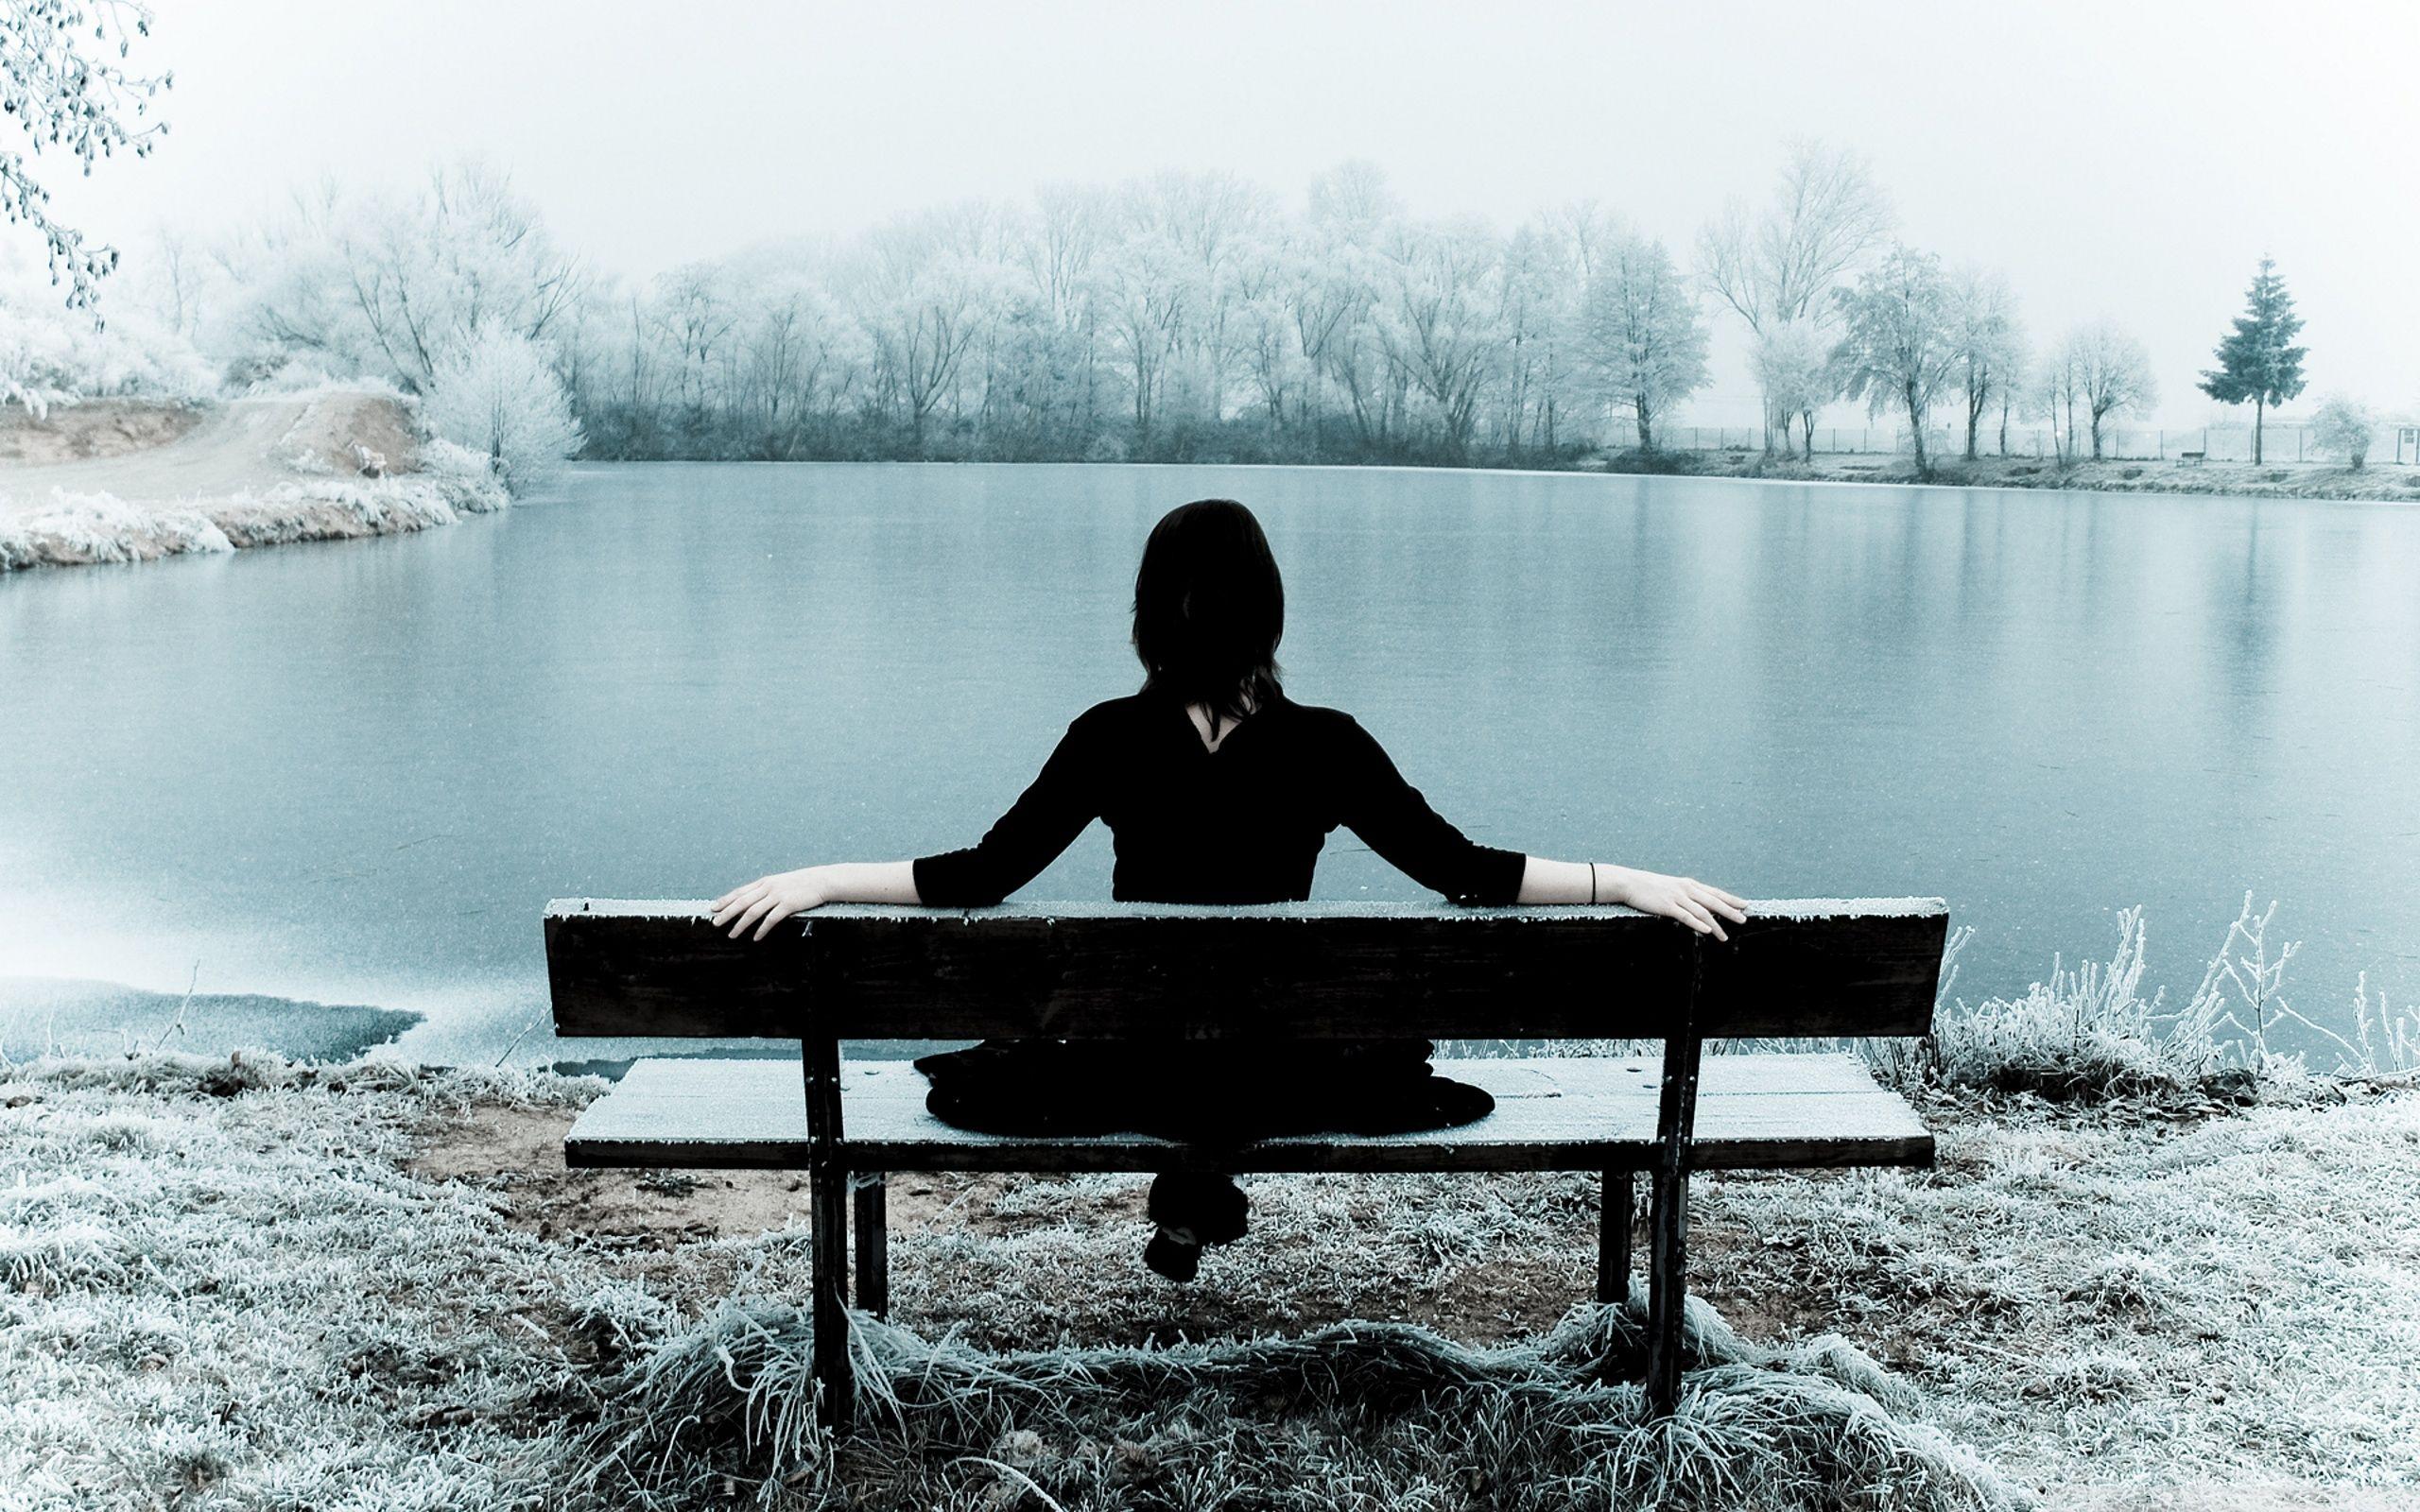 Woman Sitting Alone On A Bench Ultra HD Desktop Background Wallpaper for 4K UHD TV, Tablet